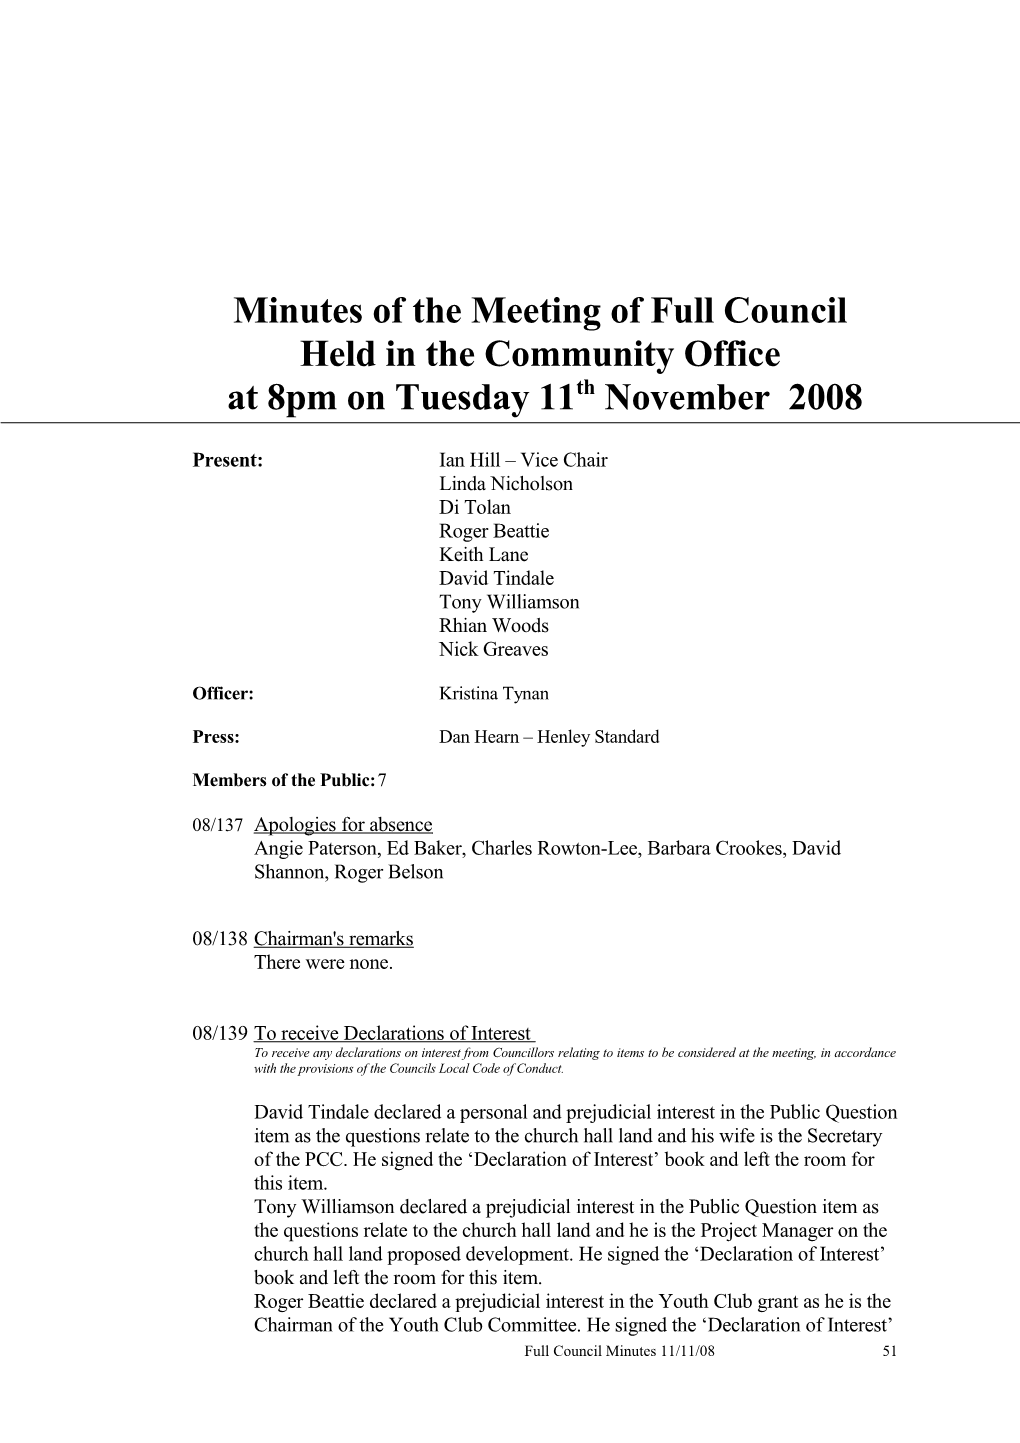 There Will Be a Meeting of Full Council